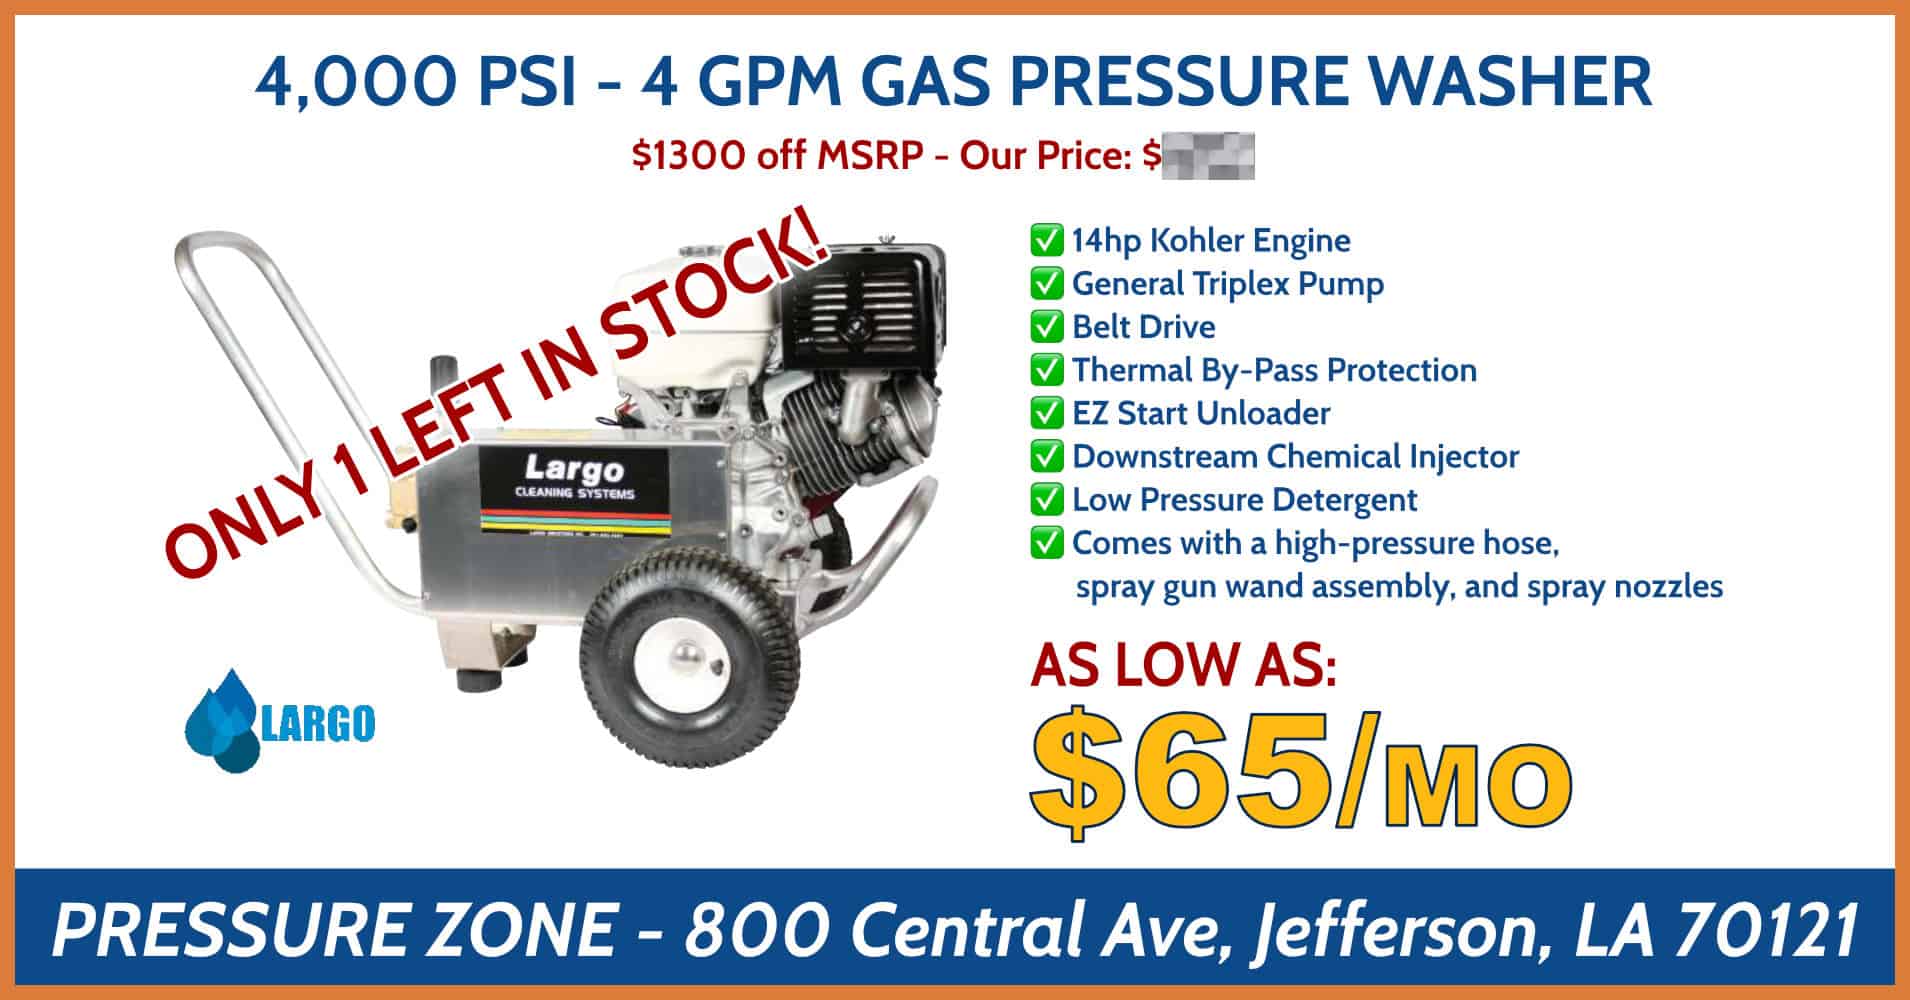 Advertisement for a largo pressure washer featuring a 4000 psi, 4 gpm model with a discounted price, highlighting only one unit left in stock, and listing its various features and pricing details.